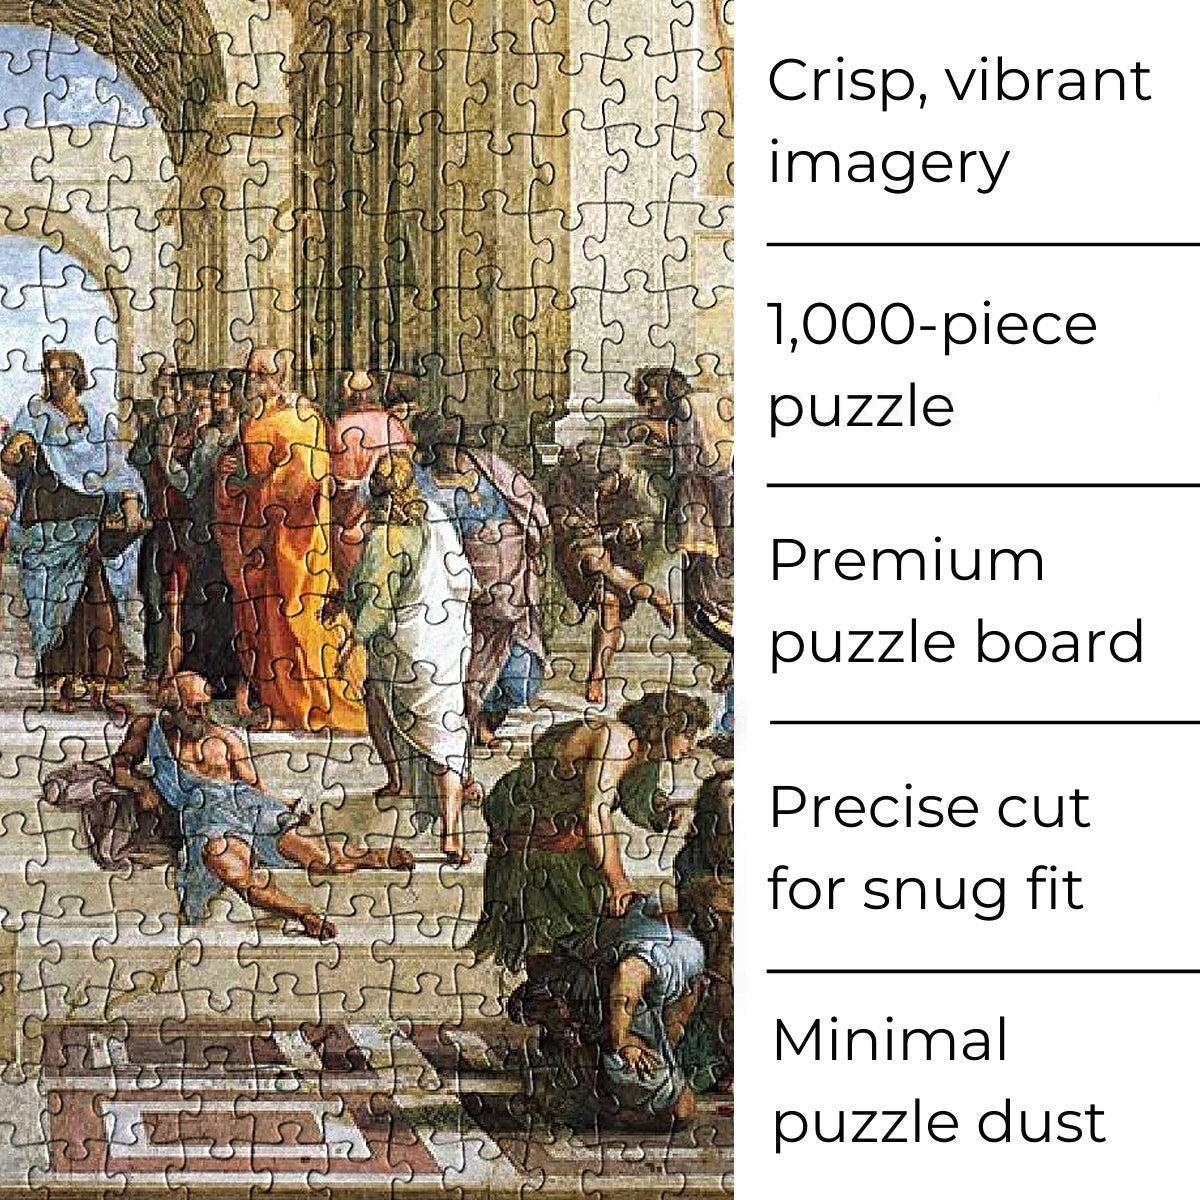 Dive into the world of Renaissance art with Eurographics' 1000-piece Raphael The School of Athens Jigsaw Puzzle - a challenging and captivating puzzle perfect for any art lover.